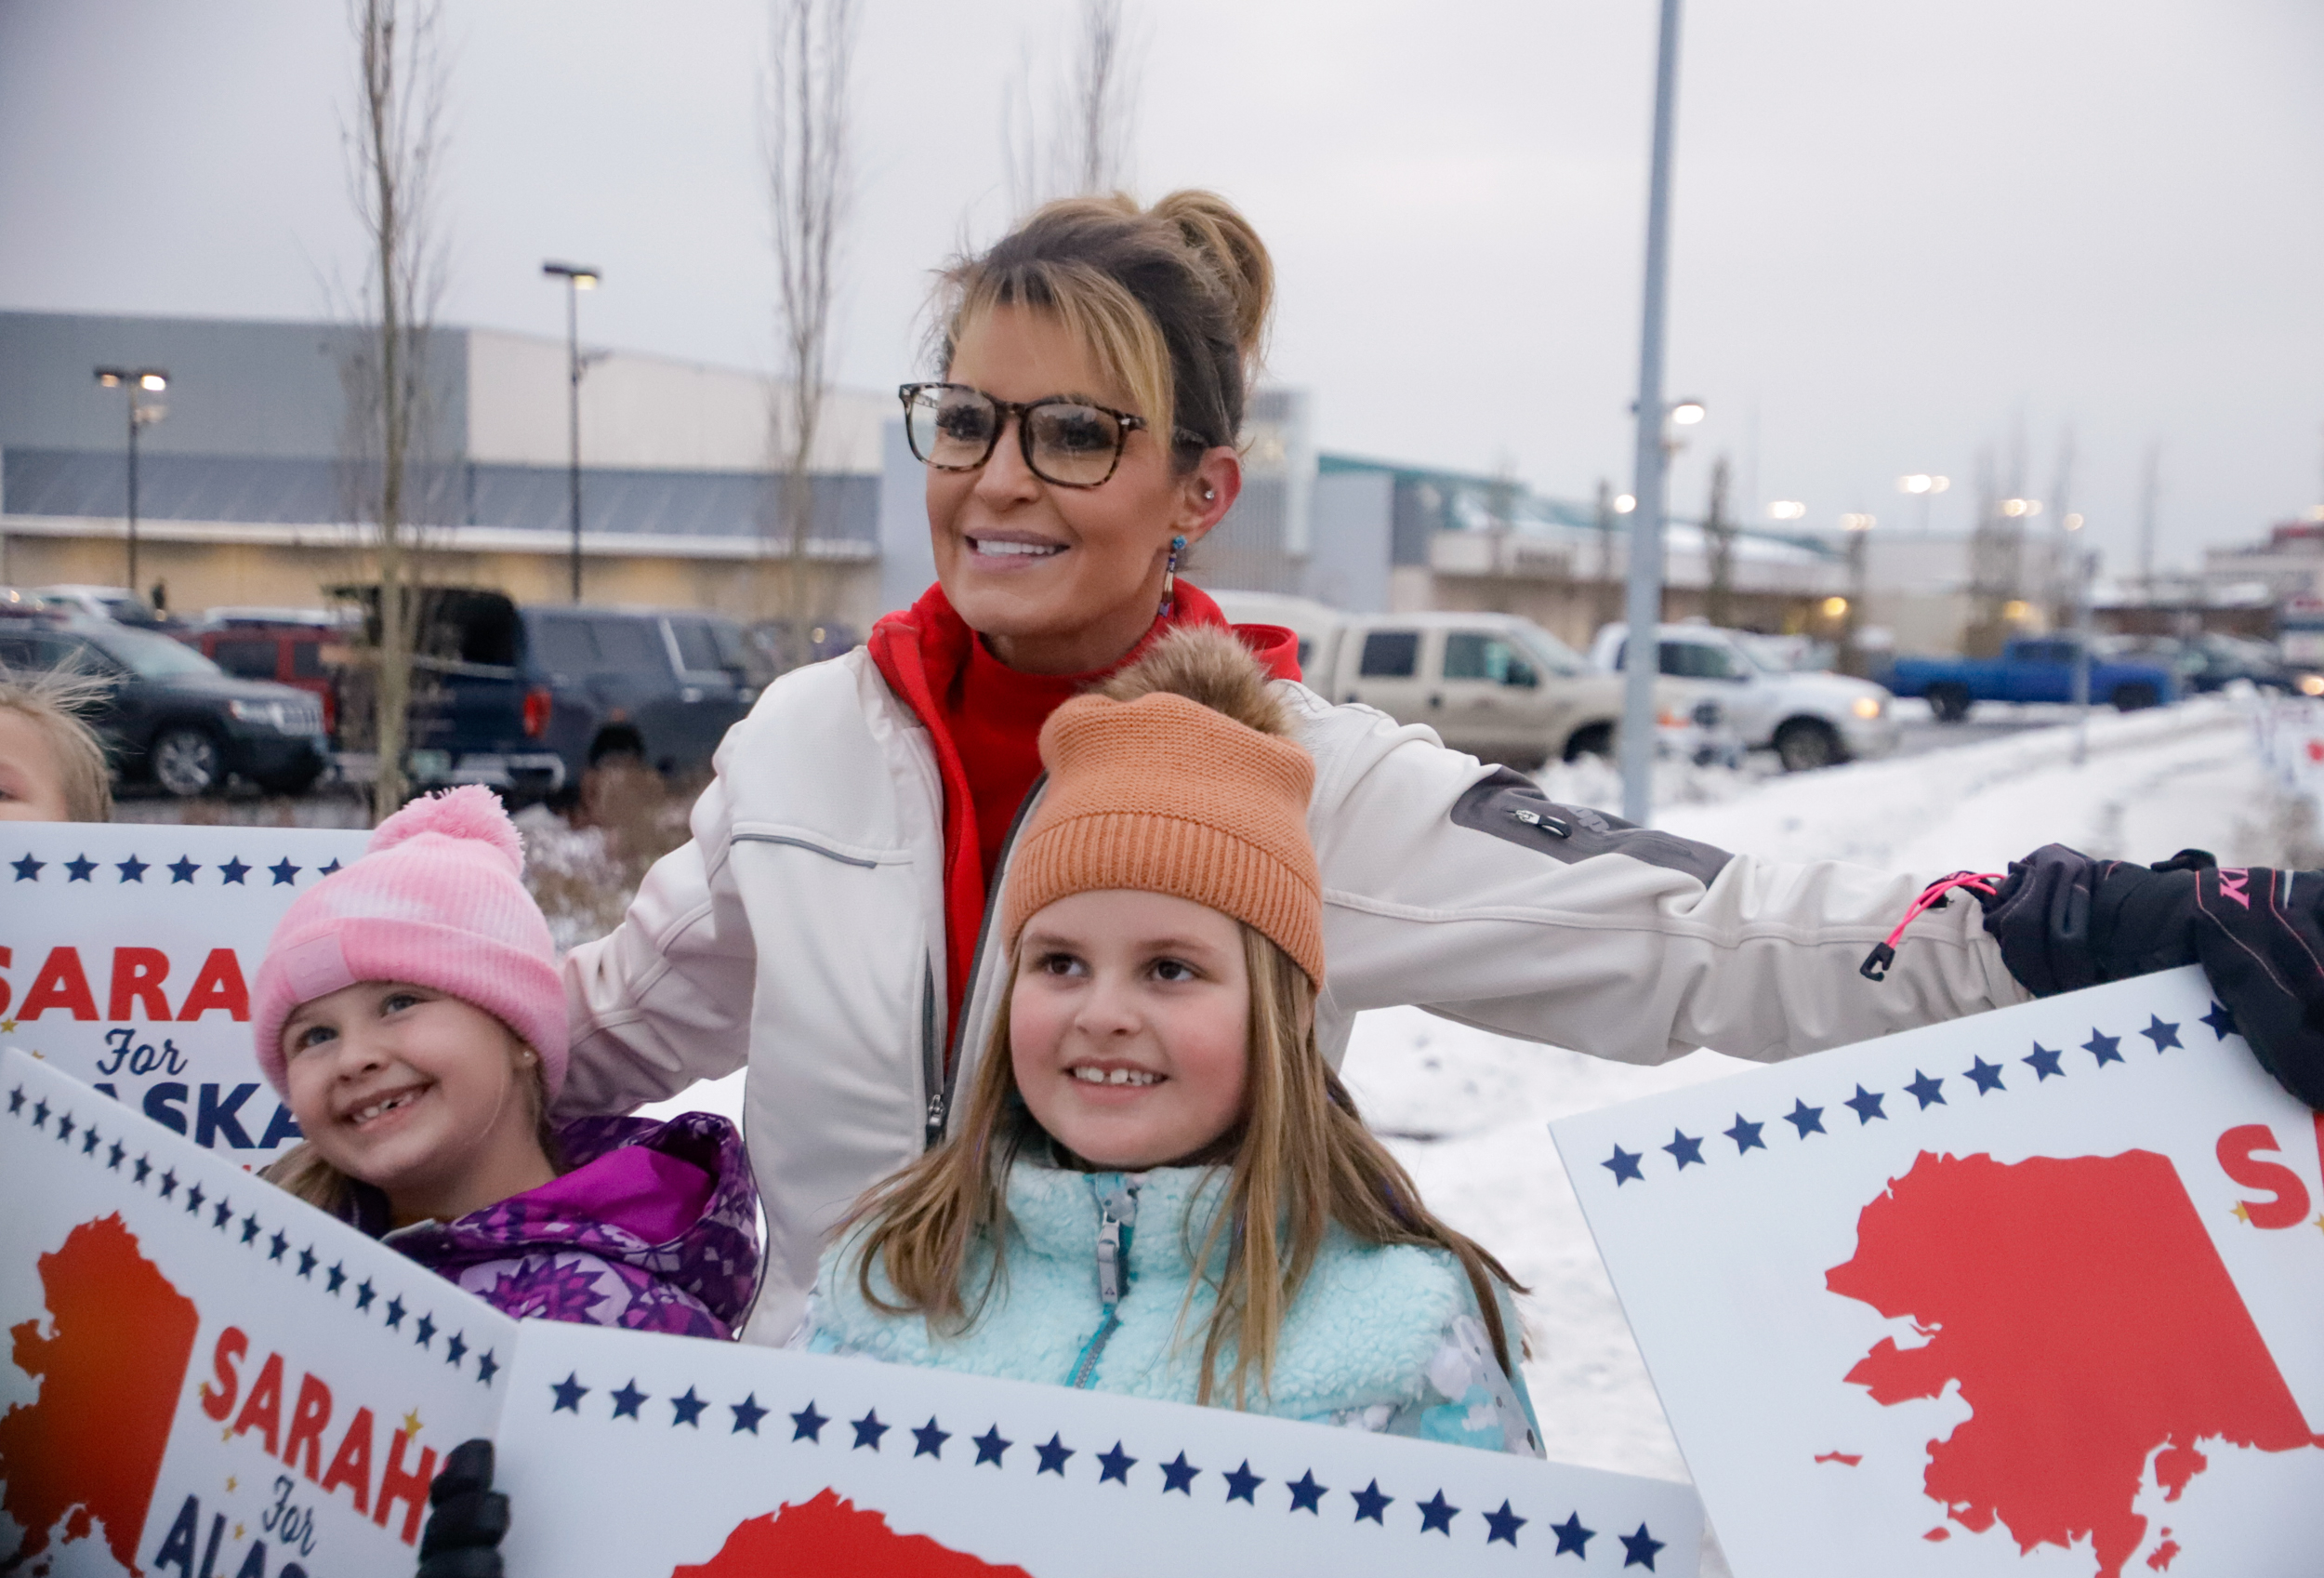 A woman and two children pose for a photo, holding Sarah for Alaska signs